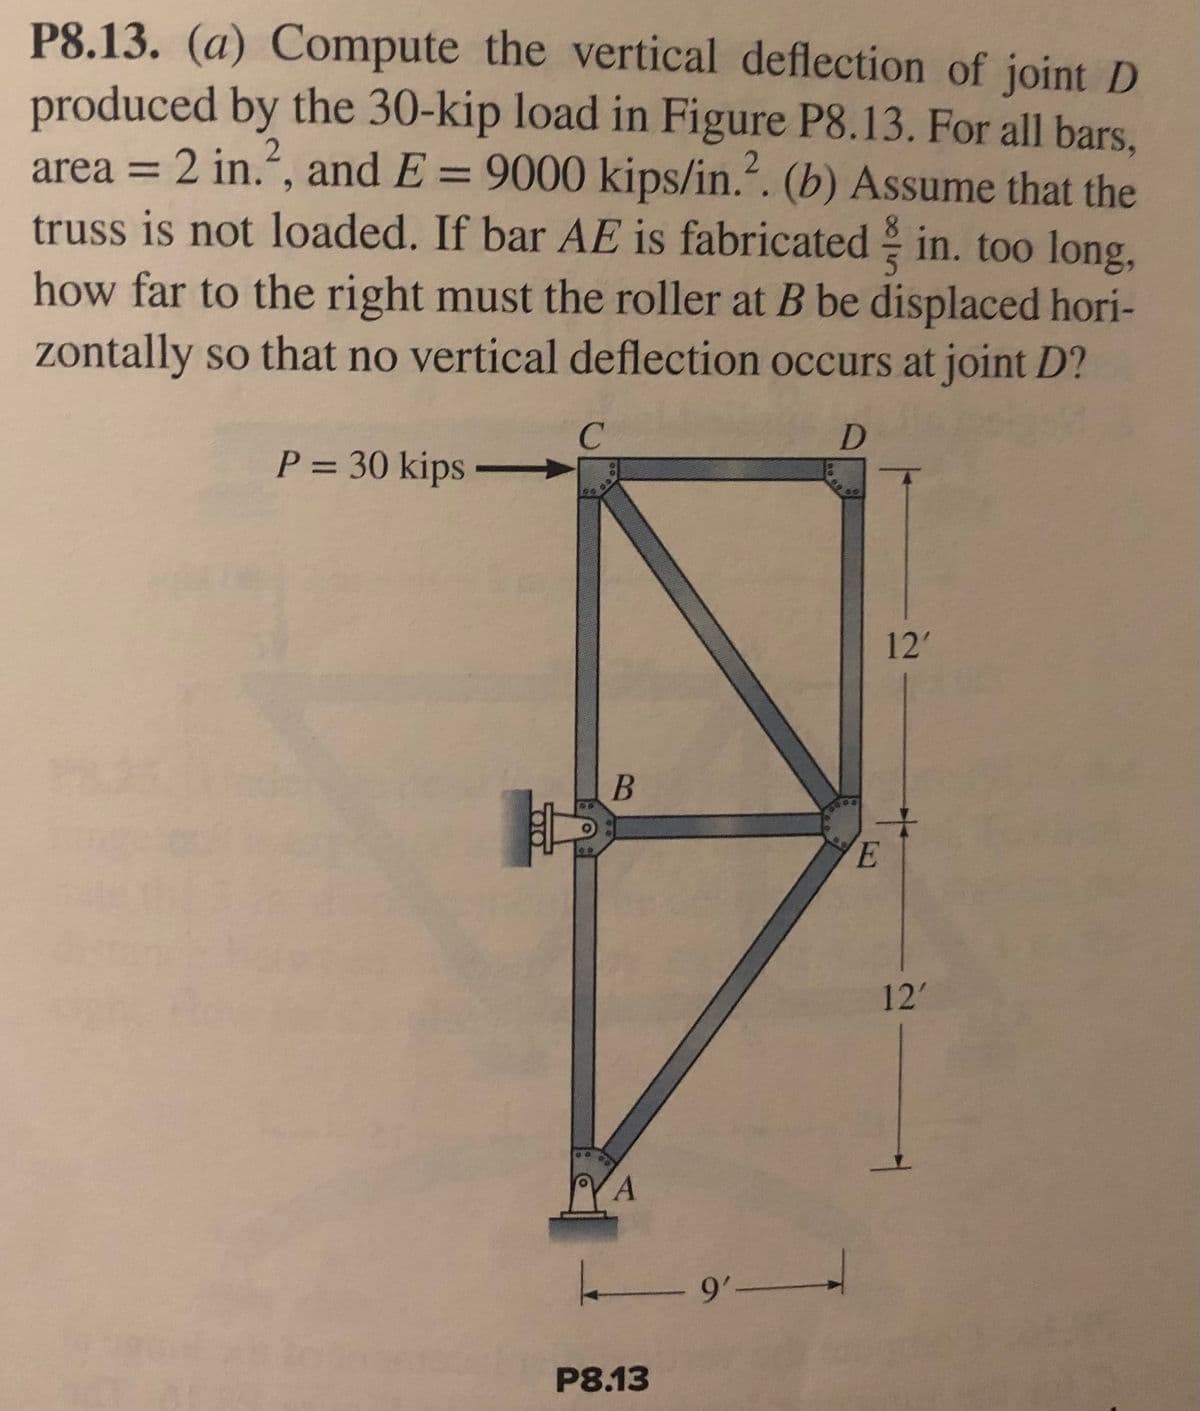 P8.13. (a) Compute the vertical deflection of joint D
produced by the 30-kip load in Figure P8.13. For all bars,
area = 2 in.², and E = 9000 kips/in.². (b) Assume that the
truss is not loaded. If bar AE is fabricated in. too long,
how far to the right must the roller at B be displaced hori-
zontally so that no vertical deflection occurs at joint D?
C
D
P = 30 kips
B
A
ـــــــــــــــــ
P8.13
5
12'
다.
E
12'